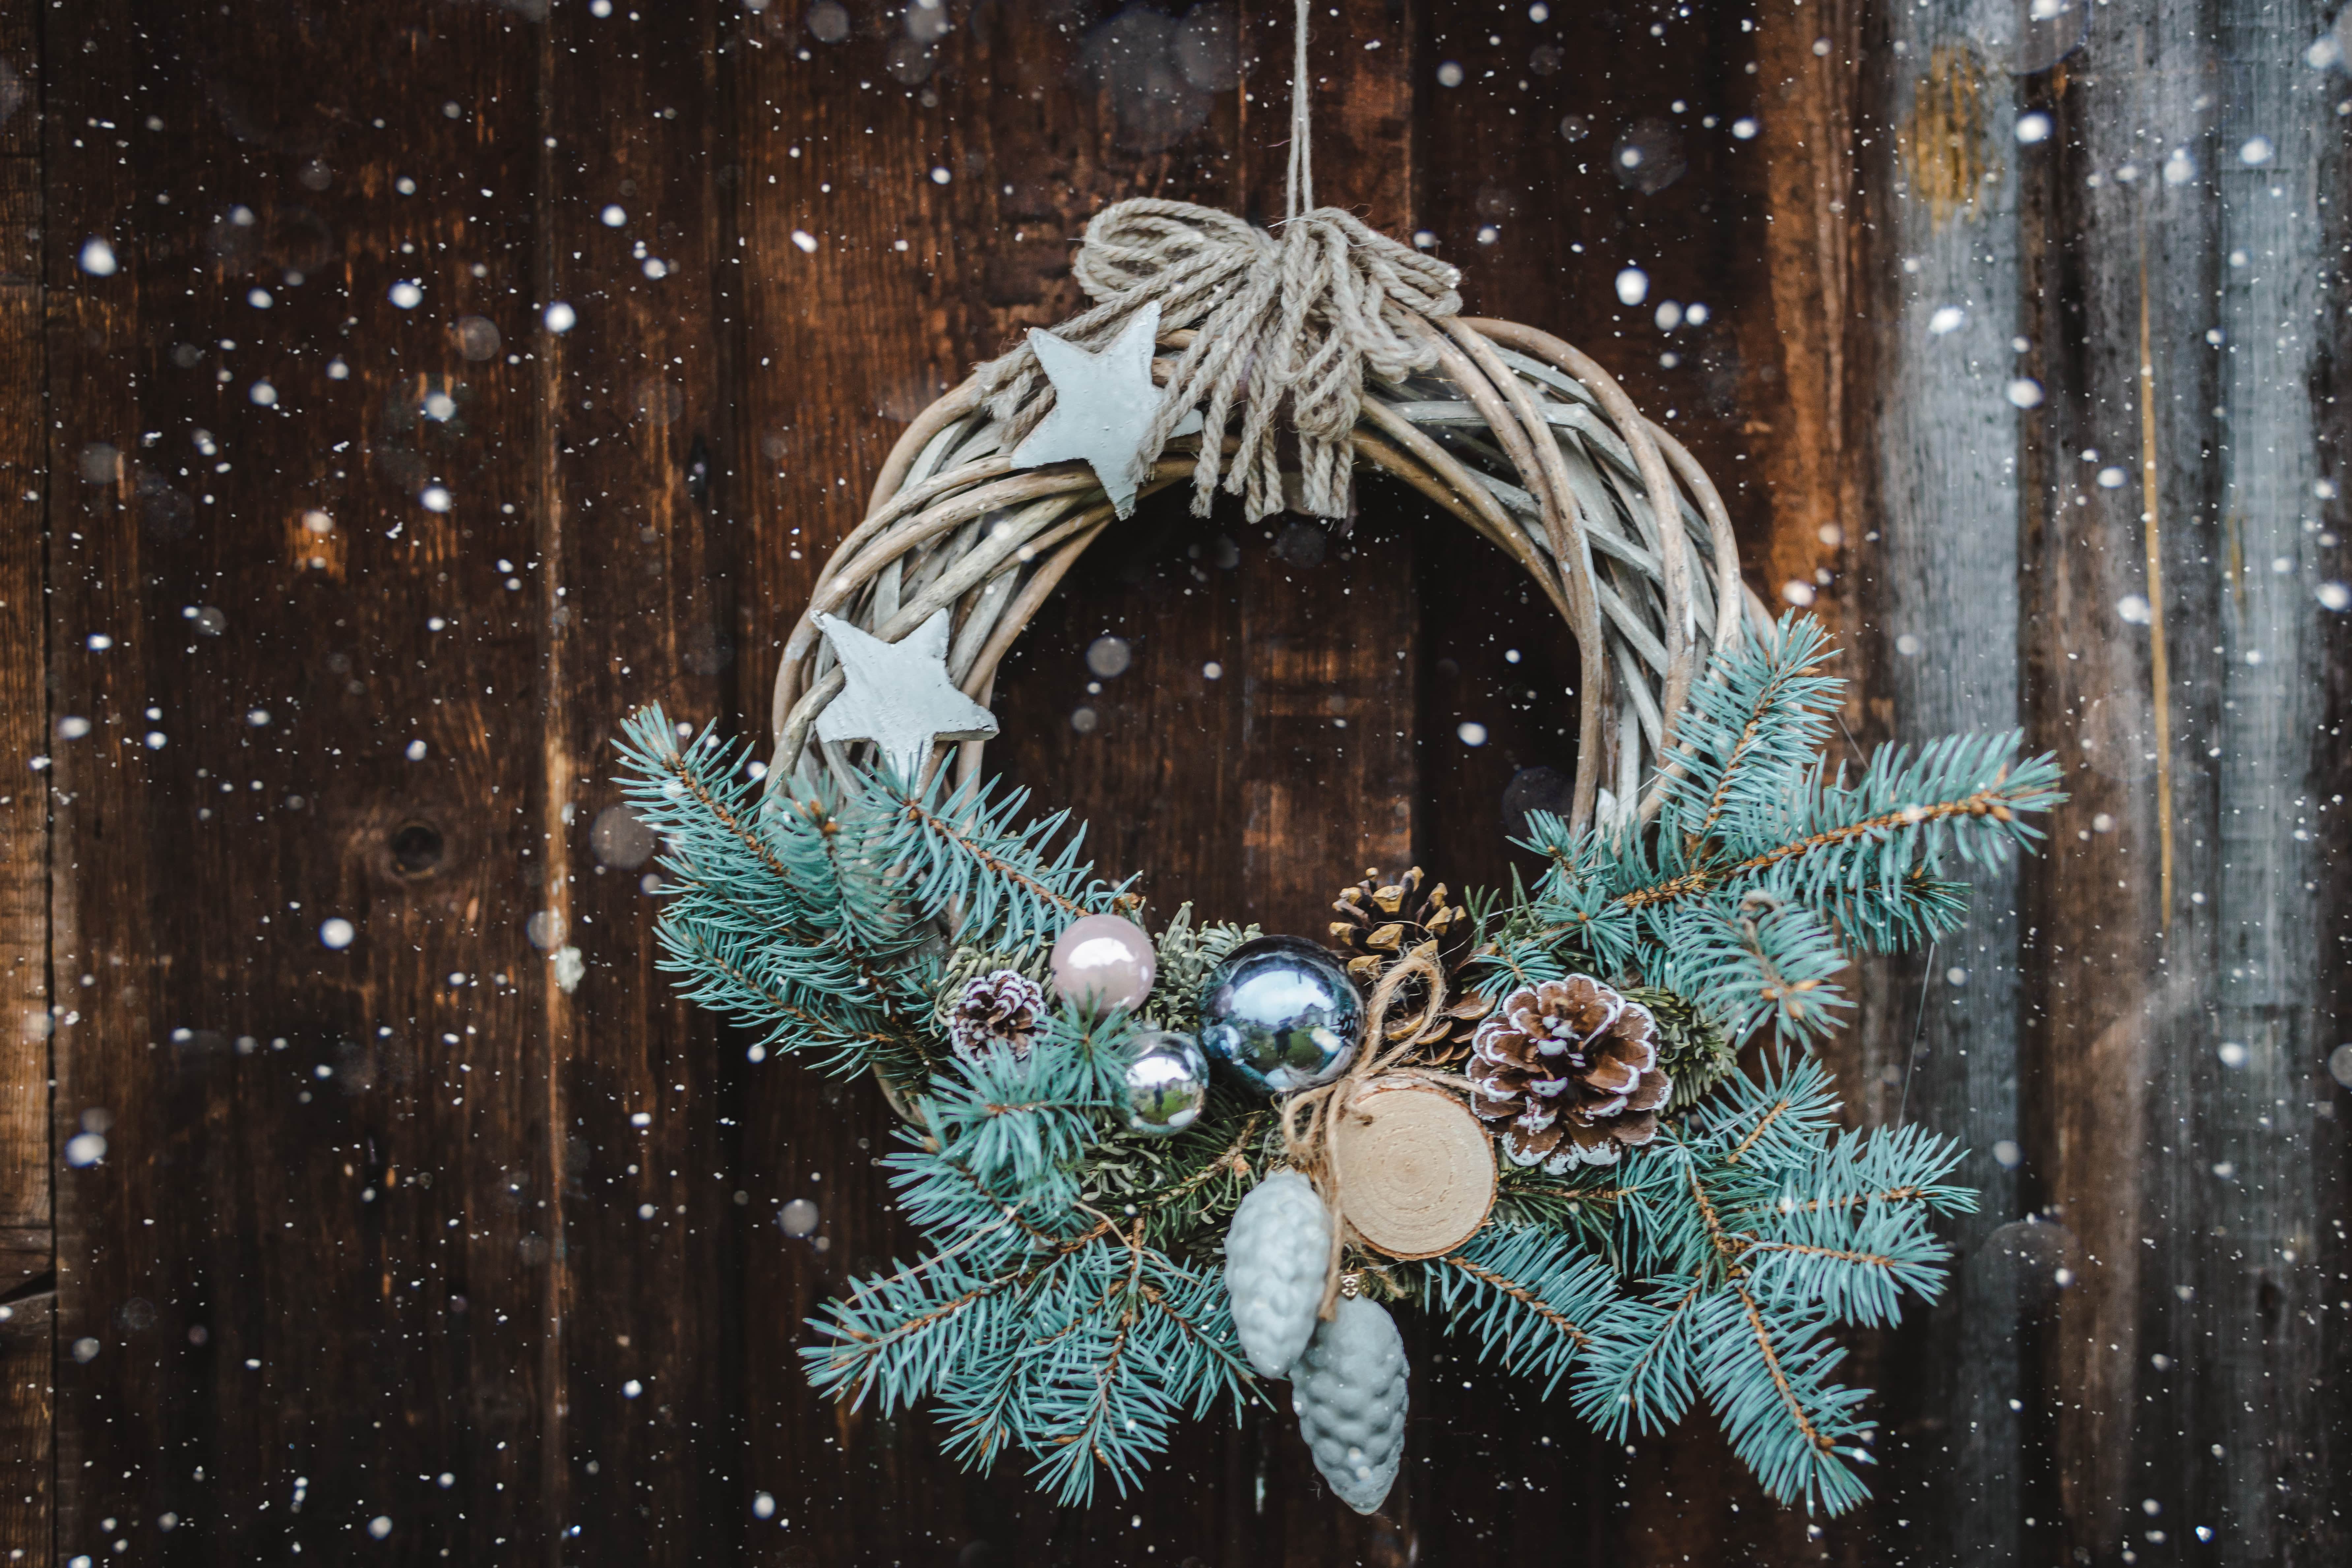 spruce and pinecone Christmas wreath on front door
